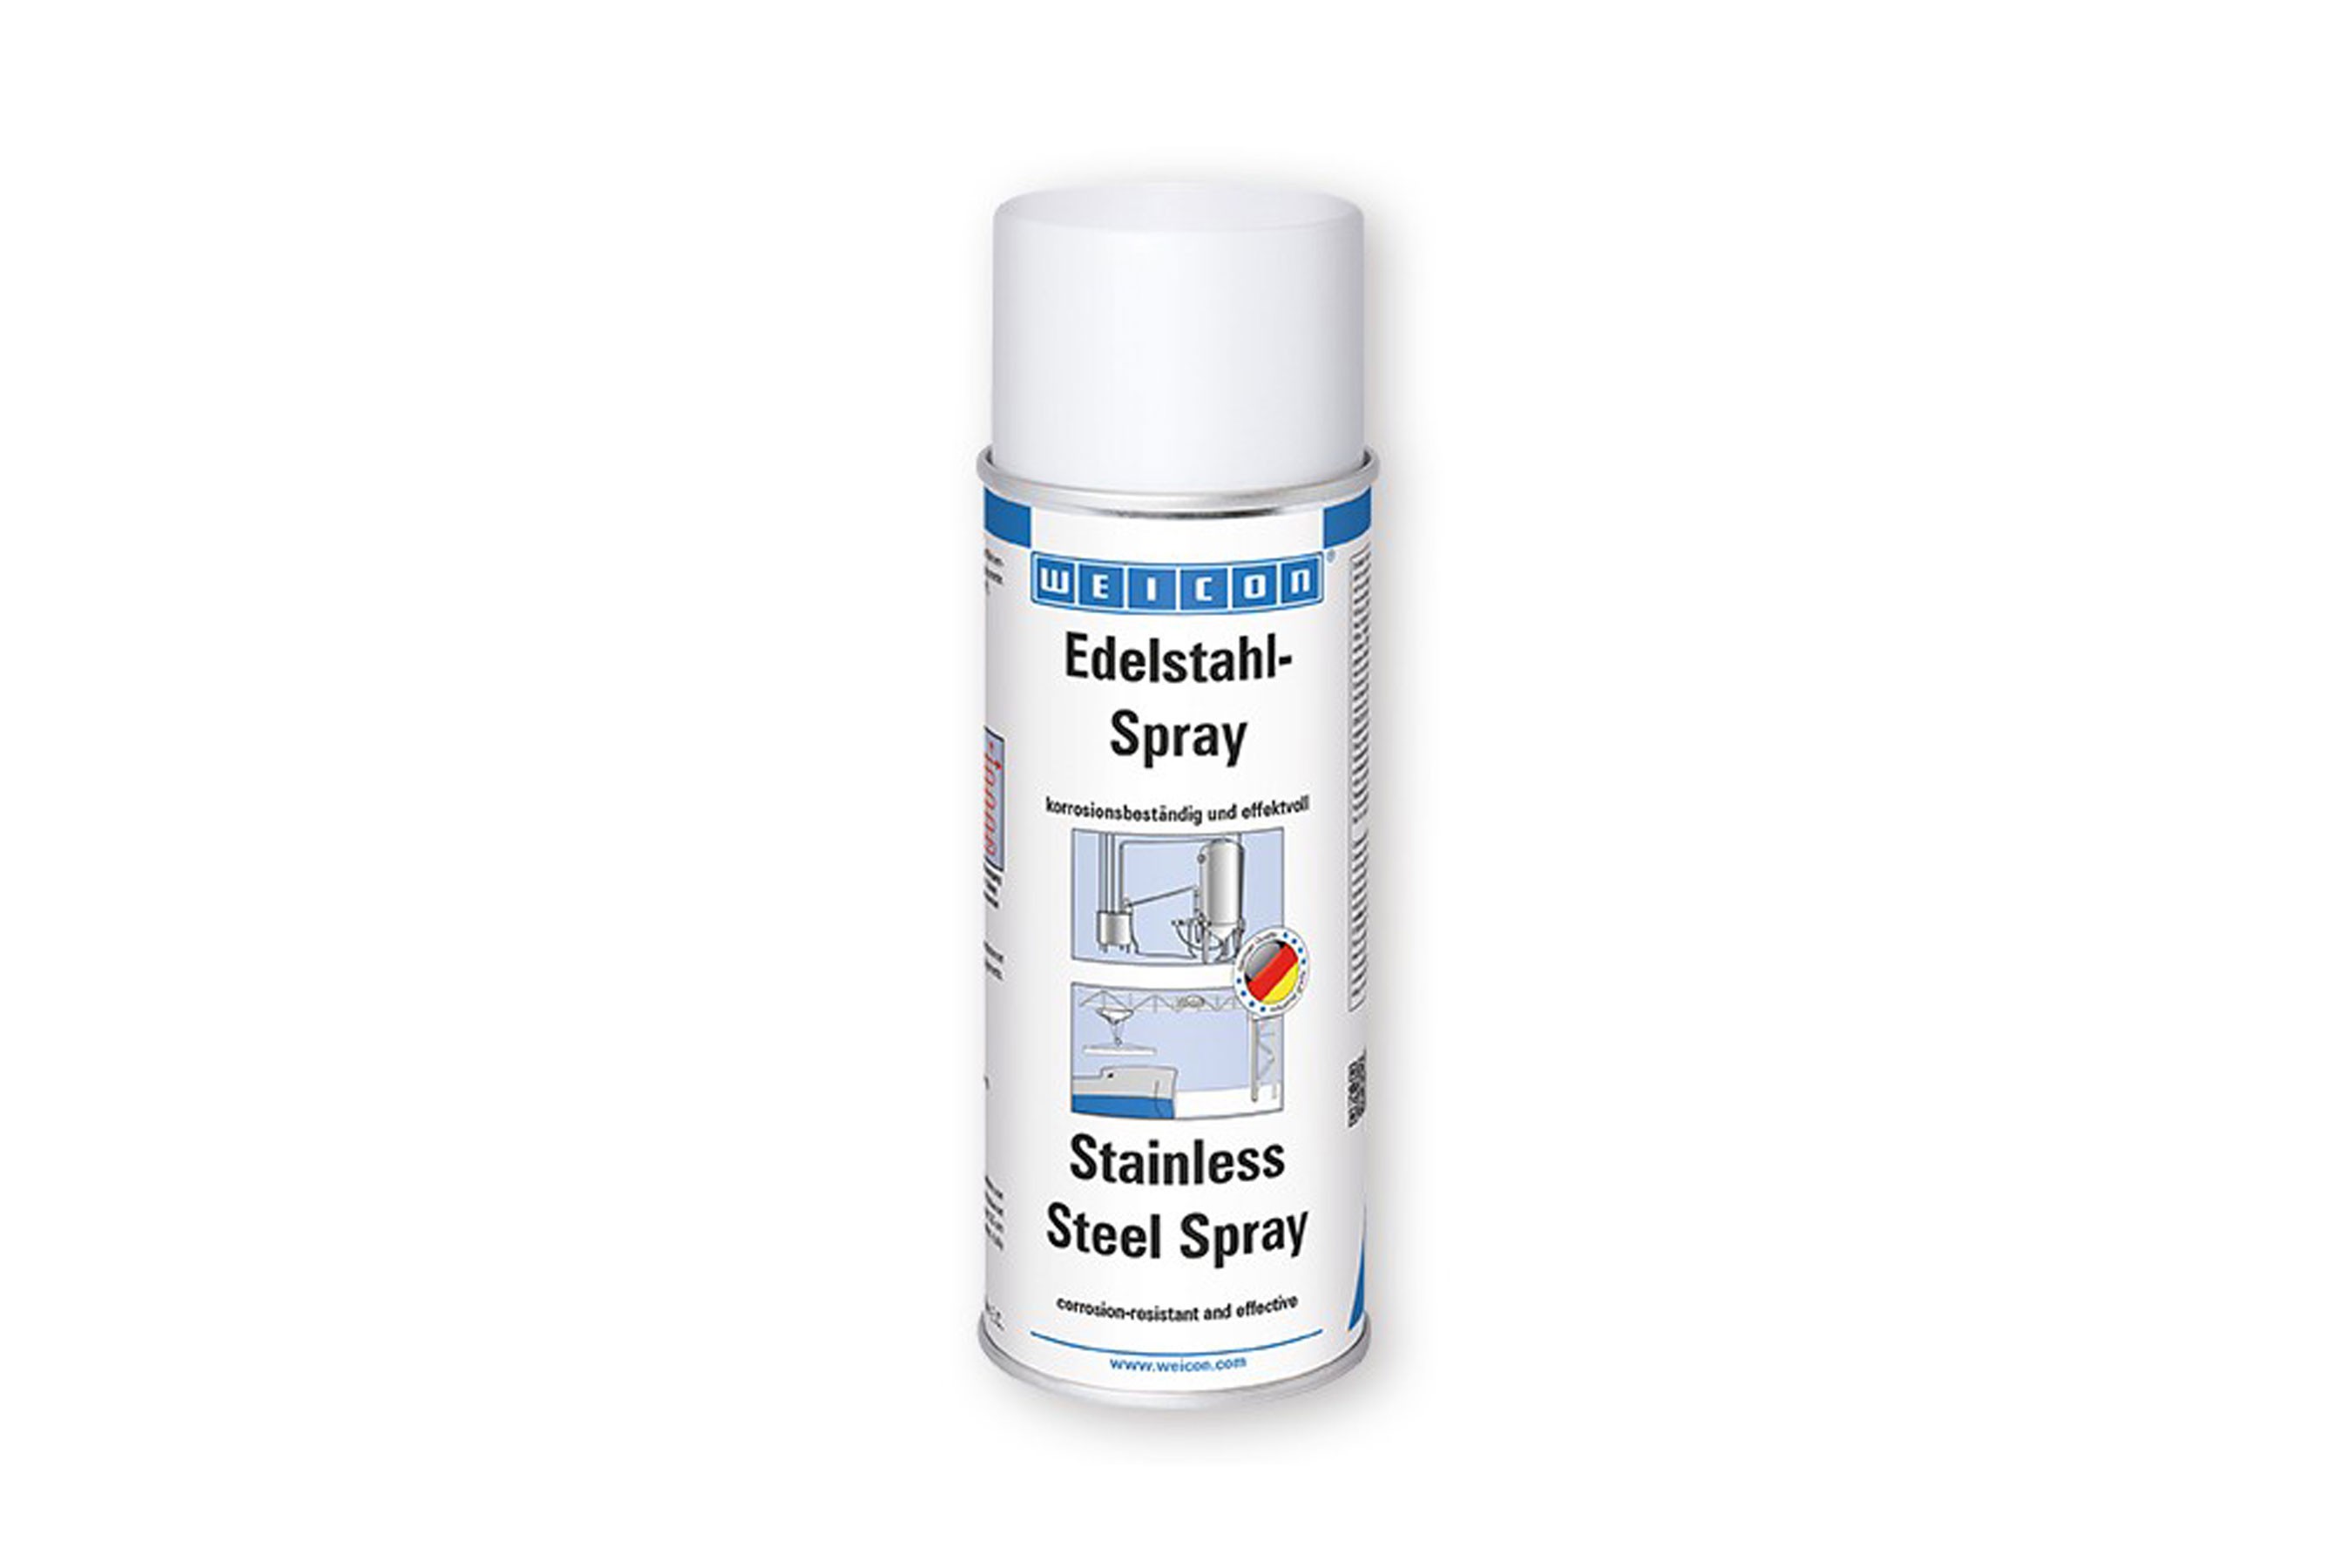 Stainless steel spray